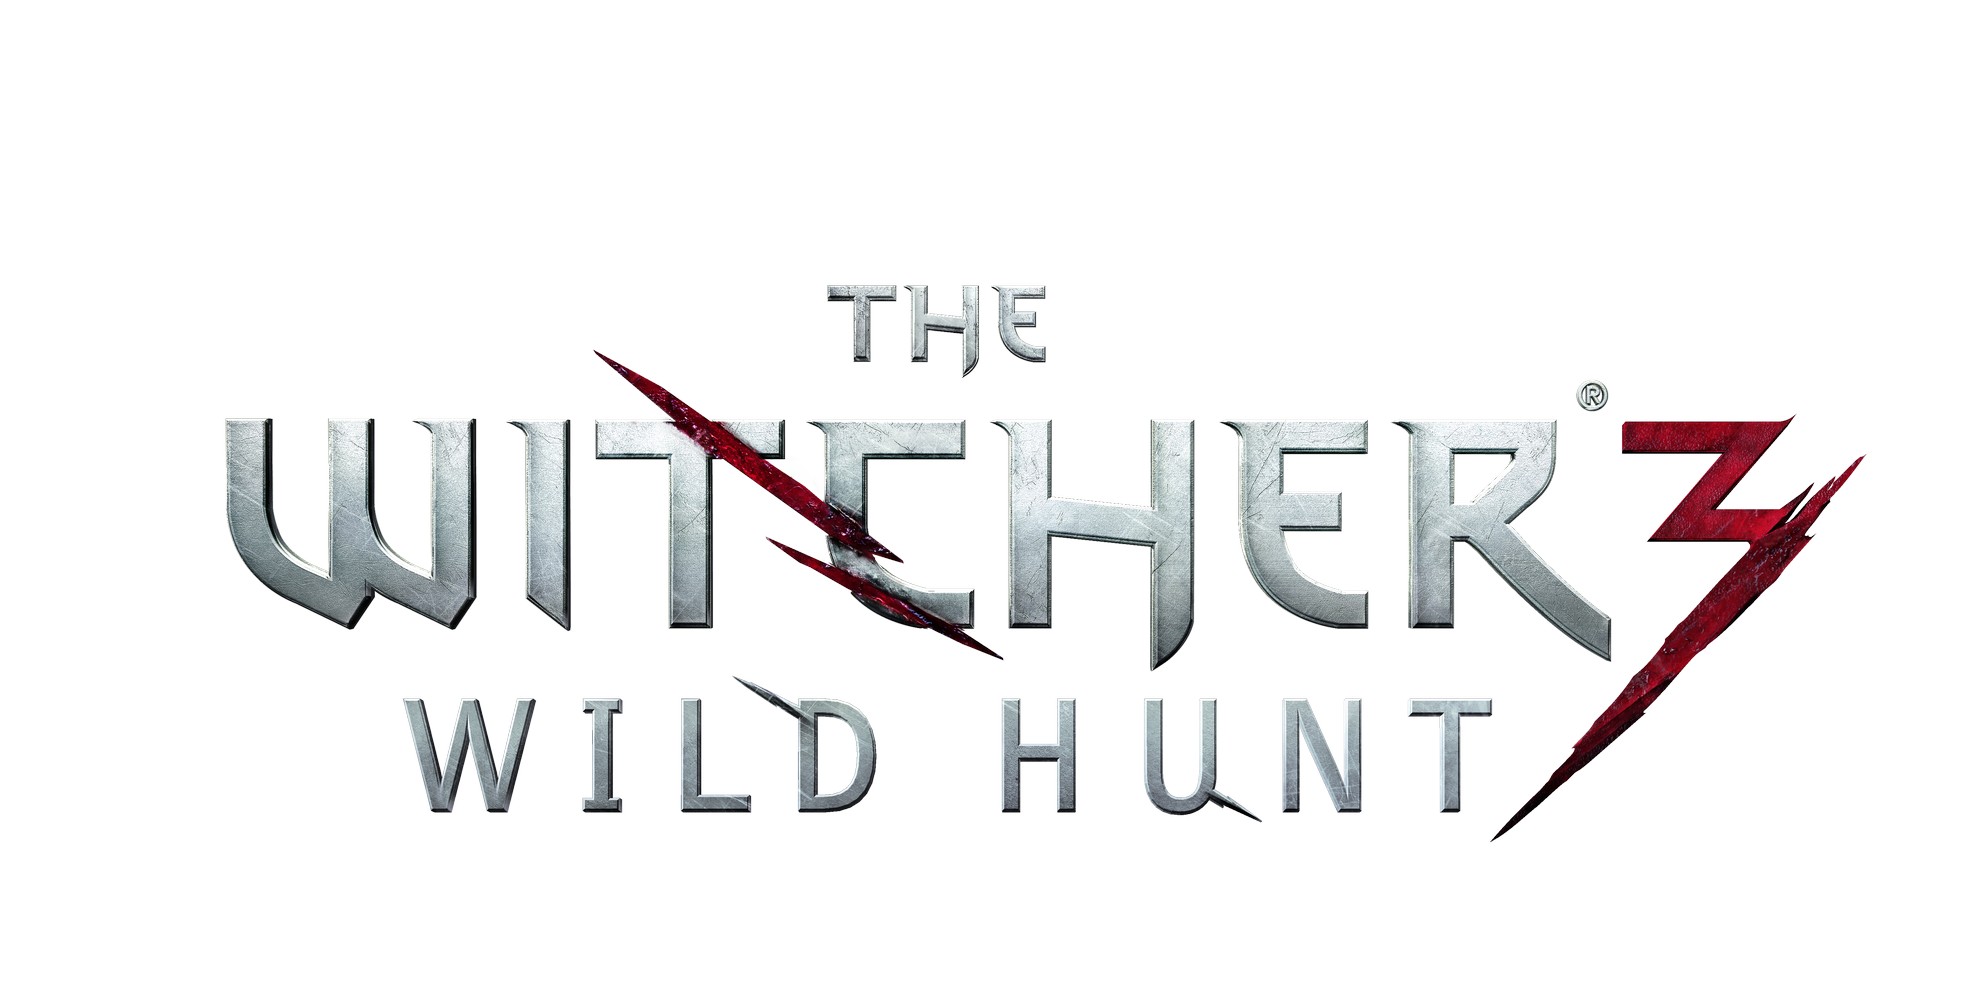 Script manager the witcher 3 фото 53